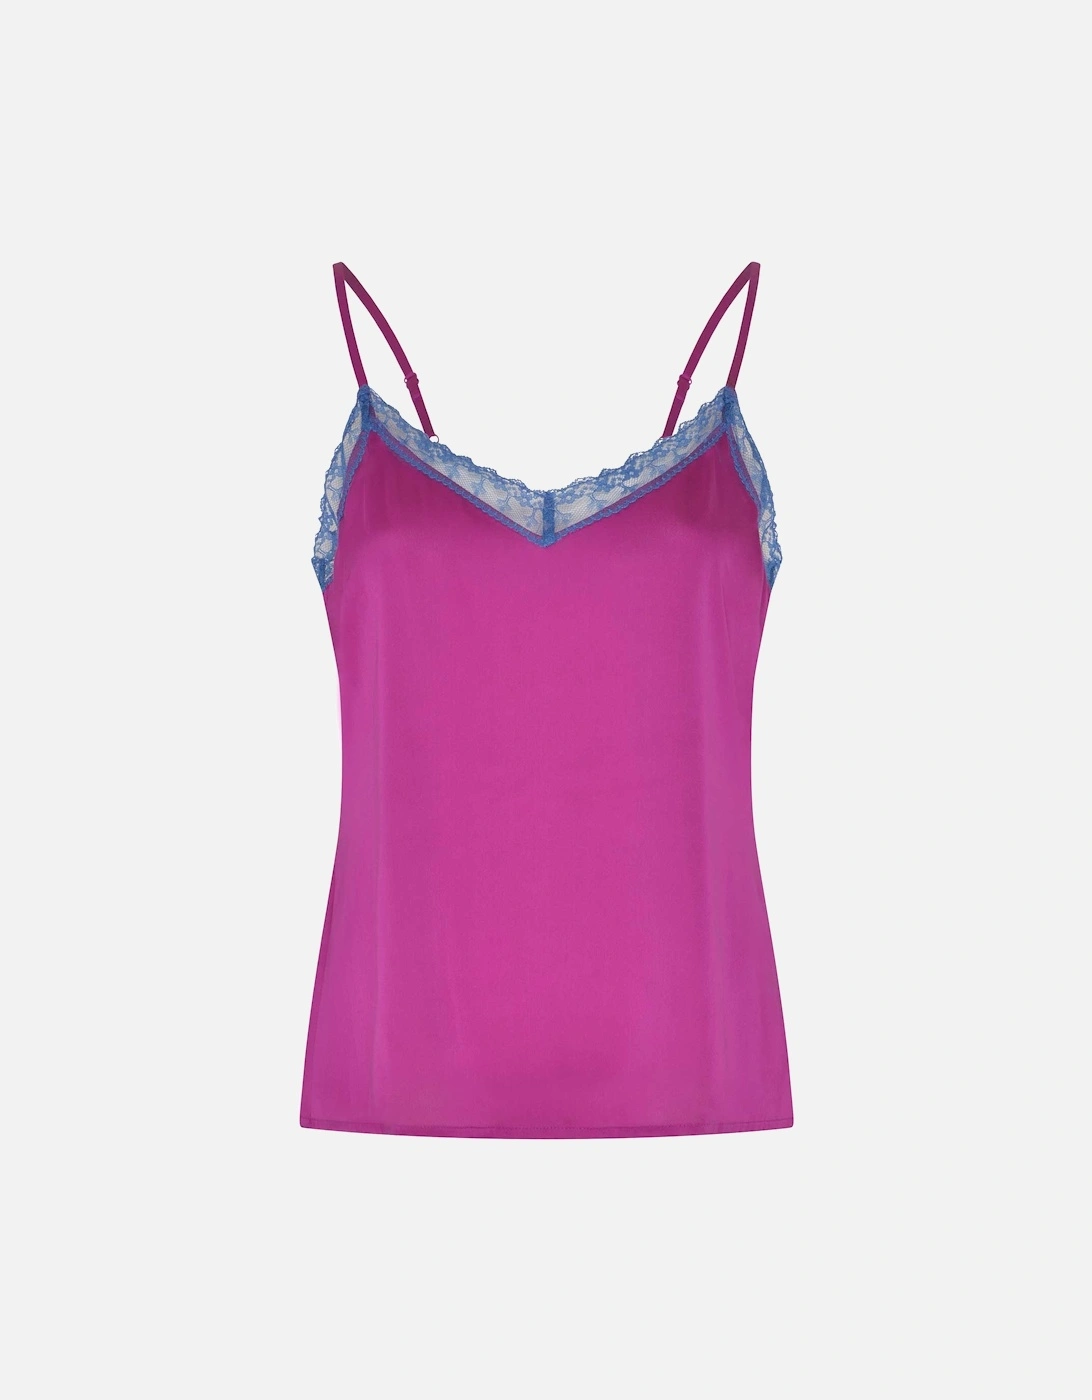 Yasmin Lace Top in Purple with Blue Trim